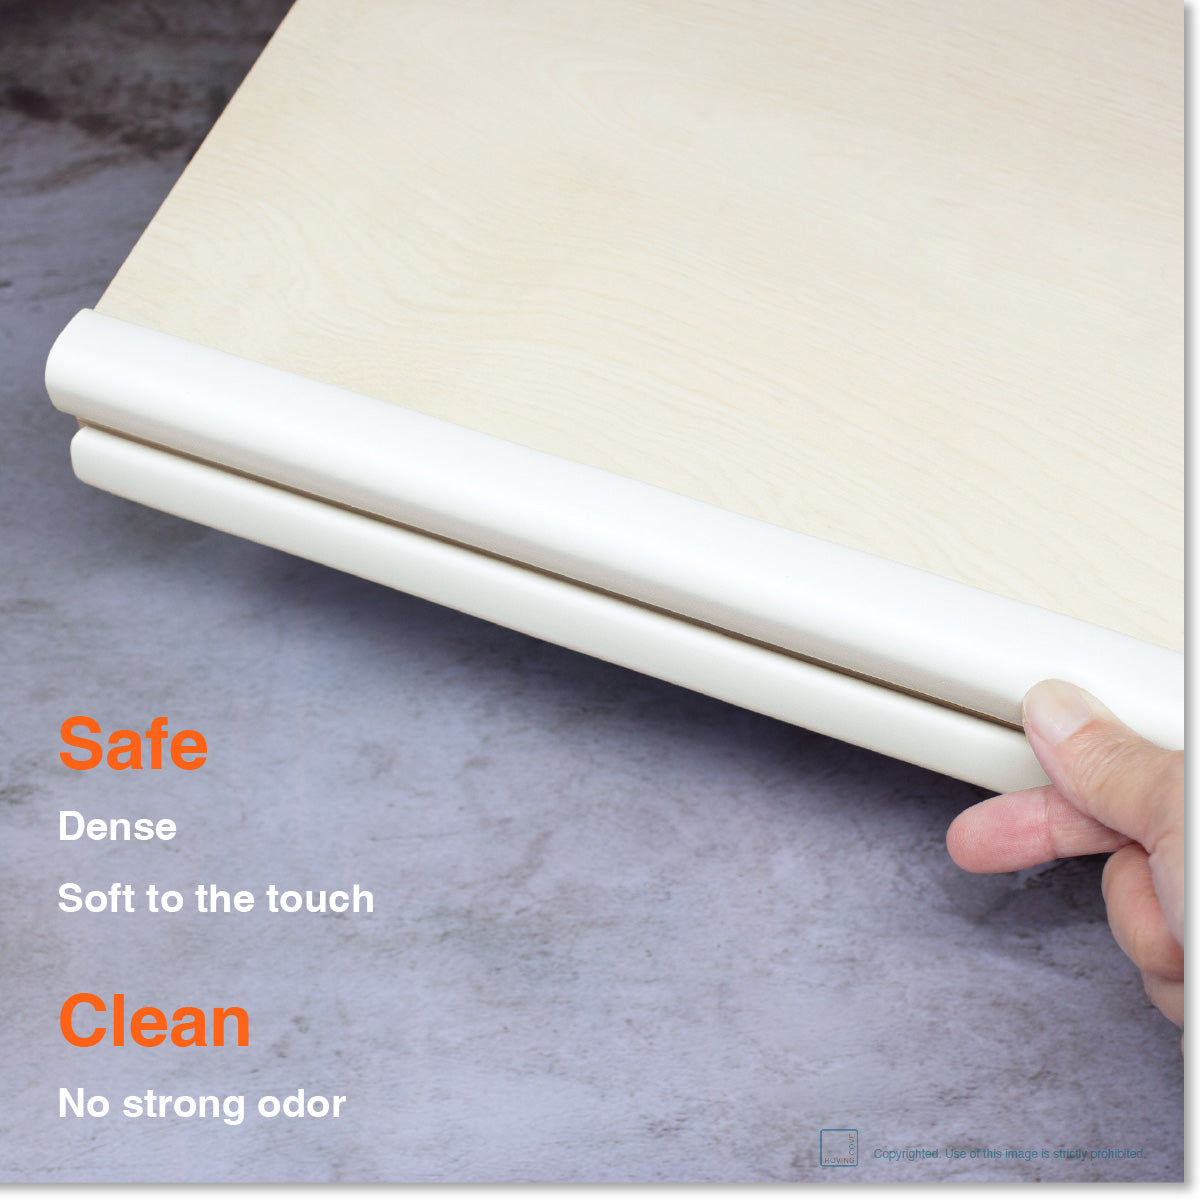 Roving Cove HeftyFit Edge Protector for Baby Proofing, Large 6ft Edge